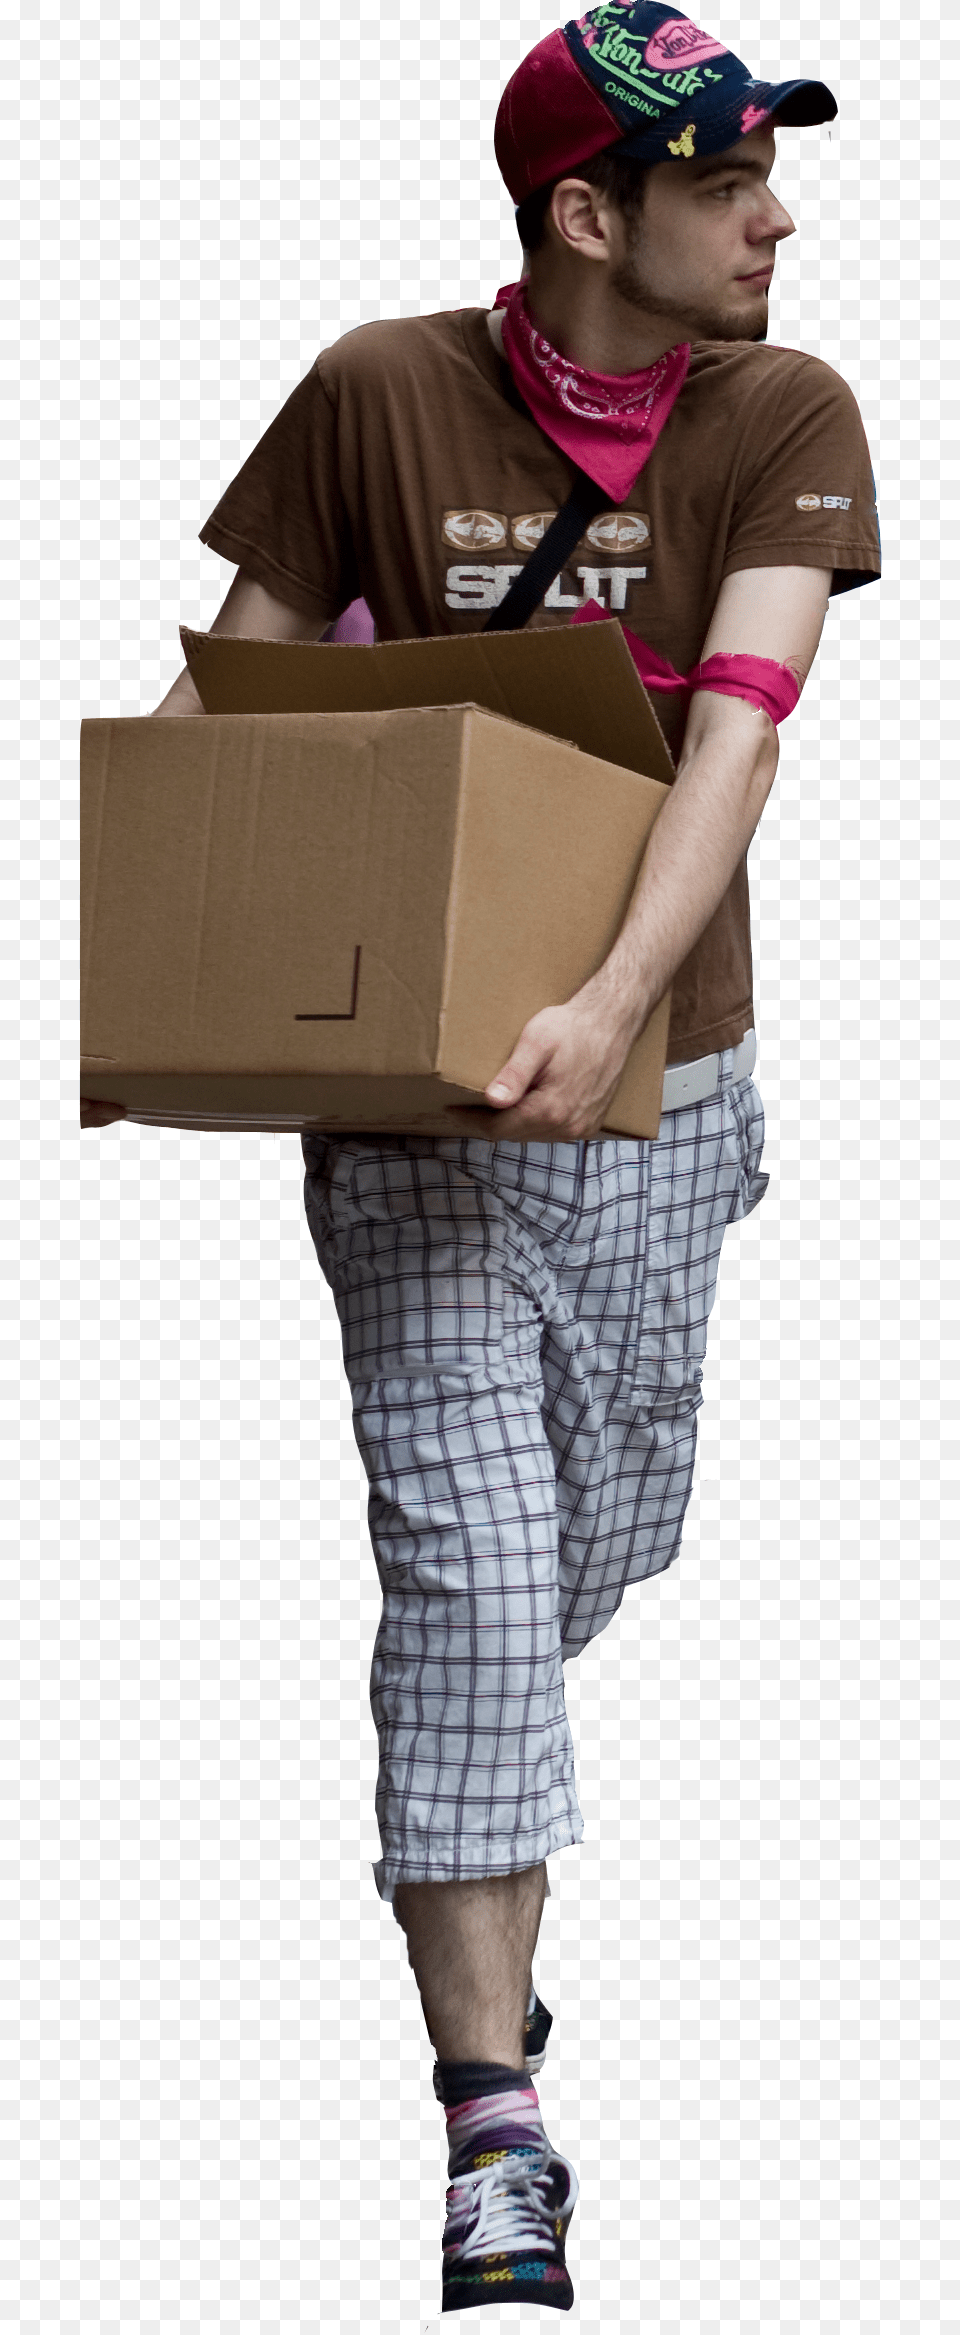 Chico Caja Hombre Hiipster Man, Clothing, Hat, Cap, Box Free Transparent Png